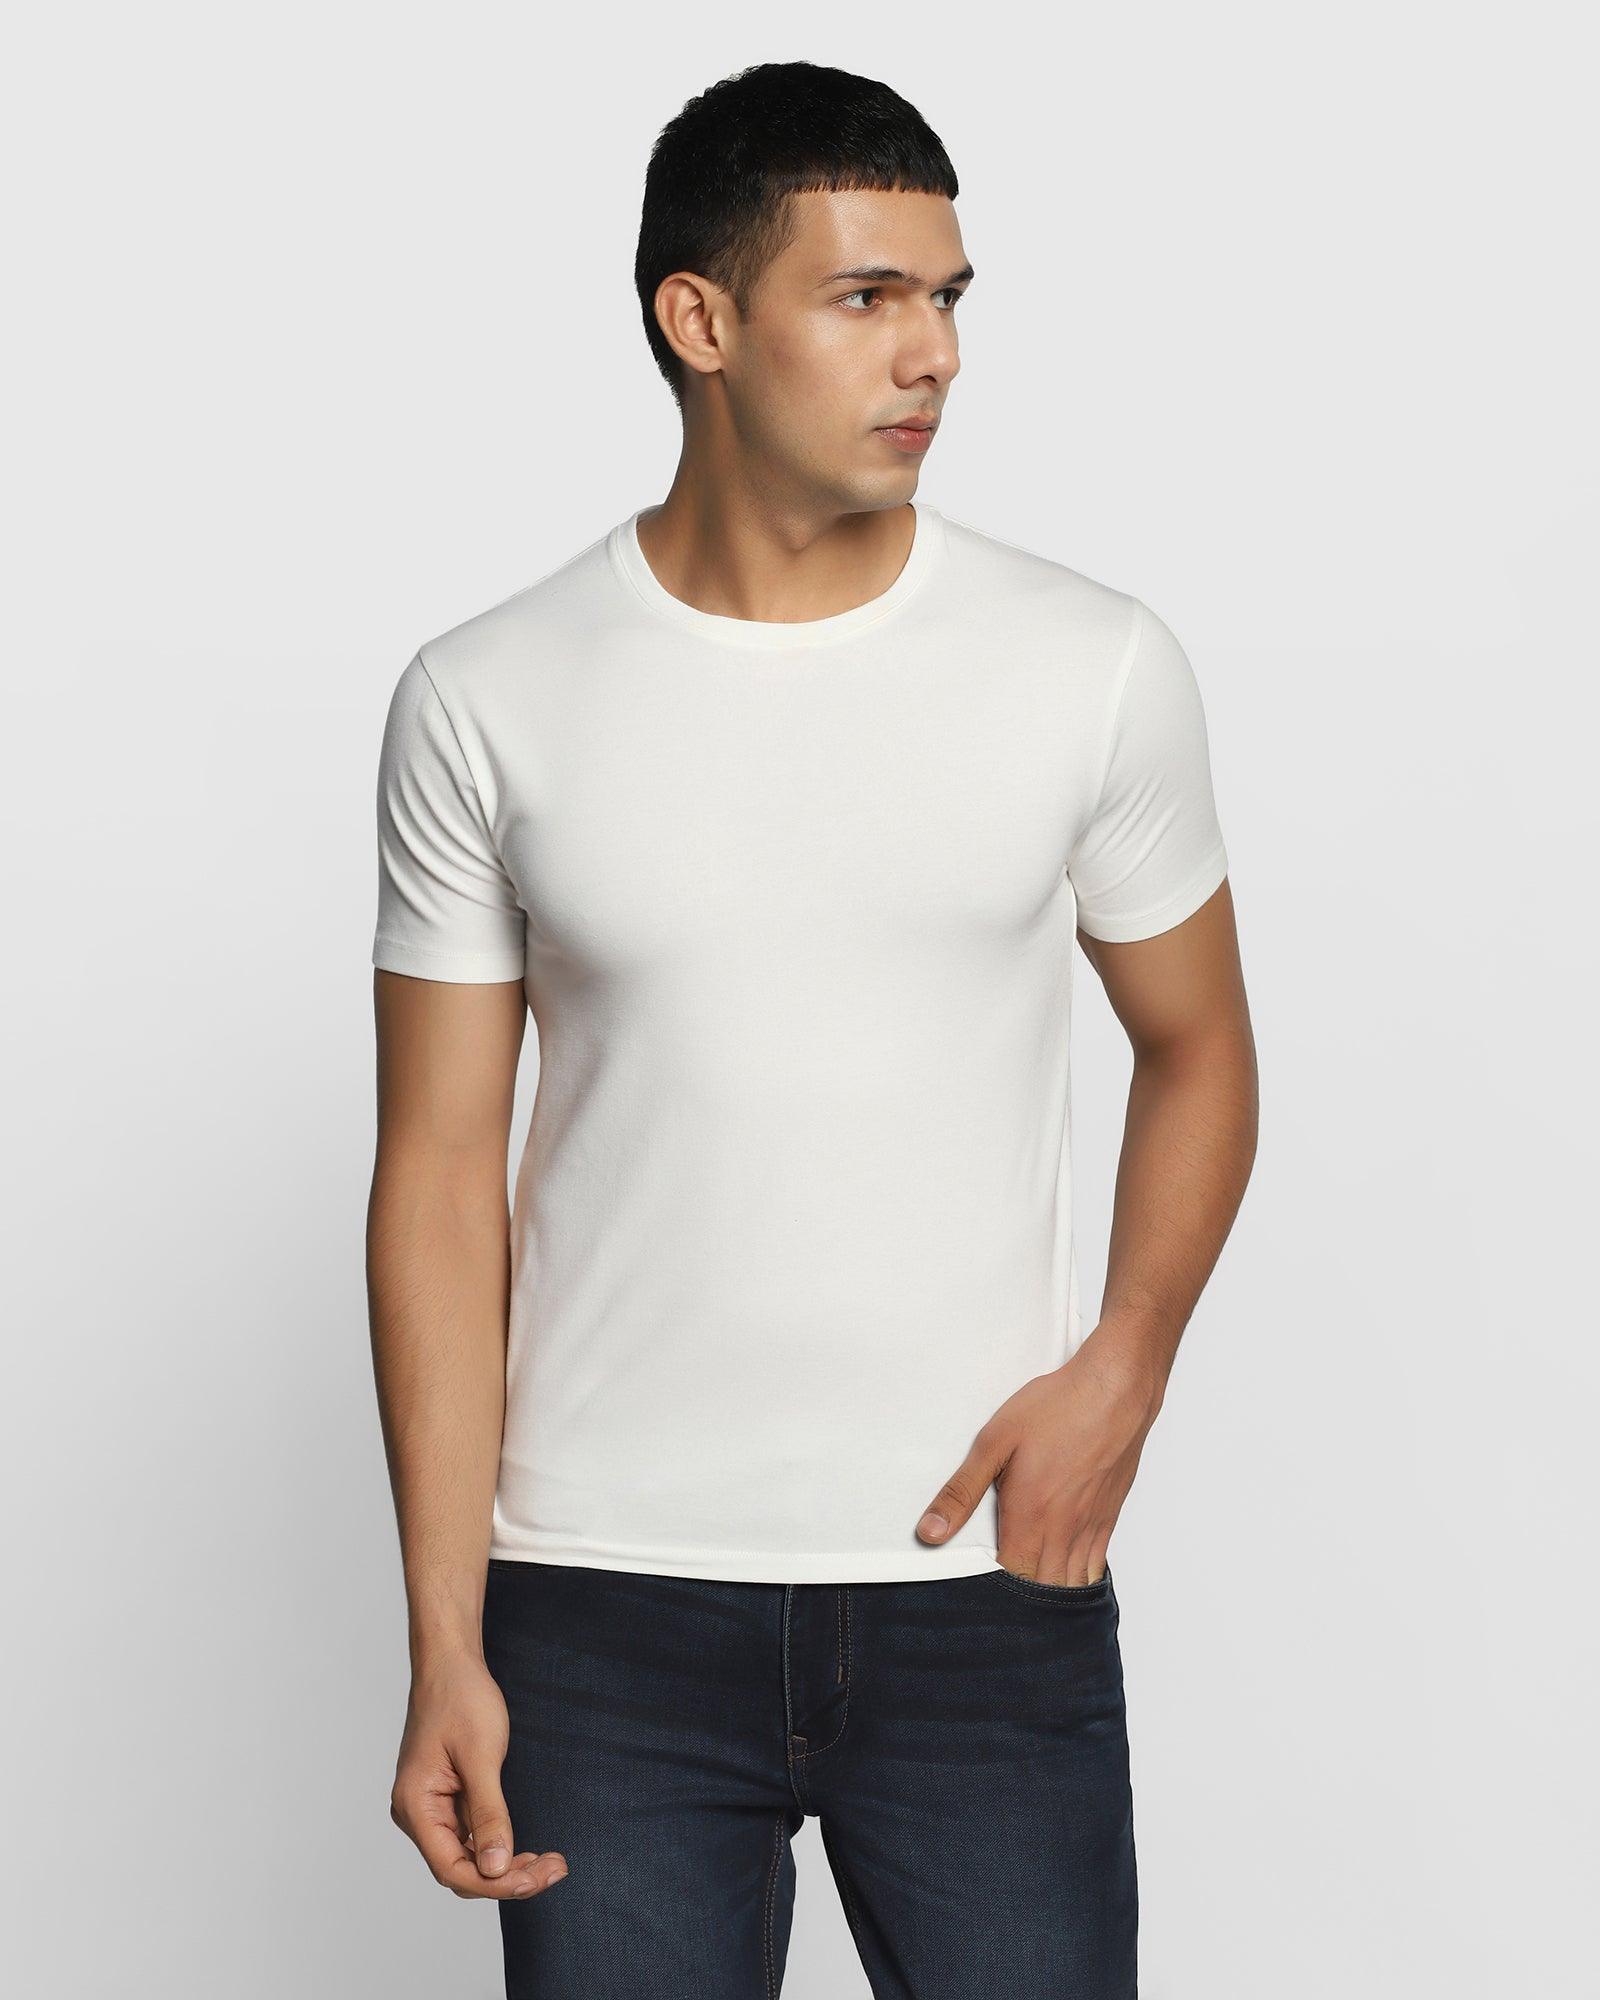 Crew Neck White Solid T-Shirt - Hola